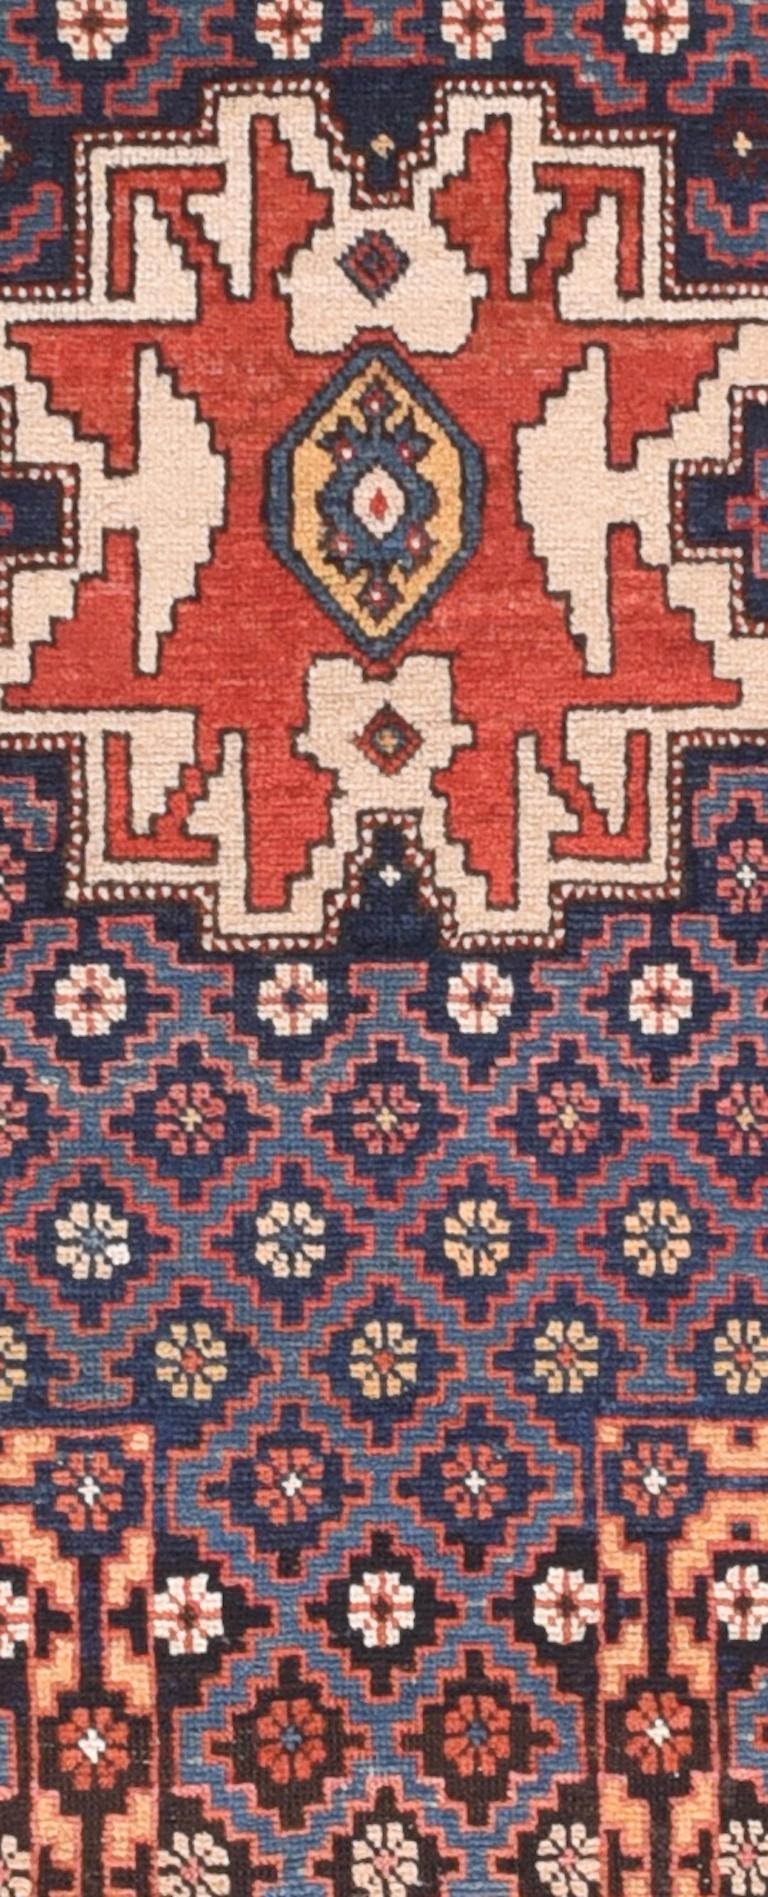 Fine antique Shirvan Caucasian Russian rug, hand knotted, circa 1890

Design: Prayer 

Shirvan rug, floor covering handmade in the Shirvan region of Azerbaijan in the southeastern Caucasus. With the exception of a group of rugs woven in the